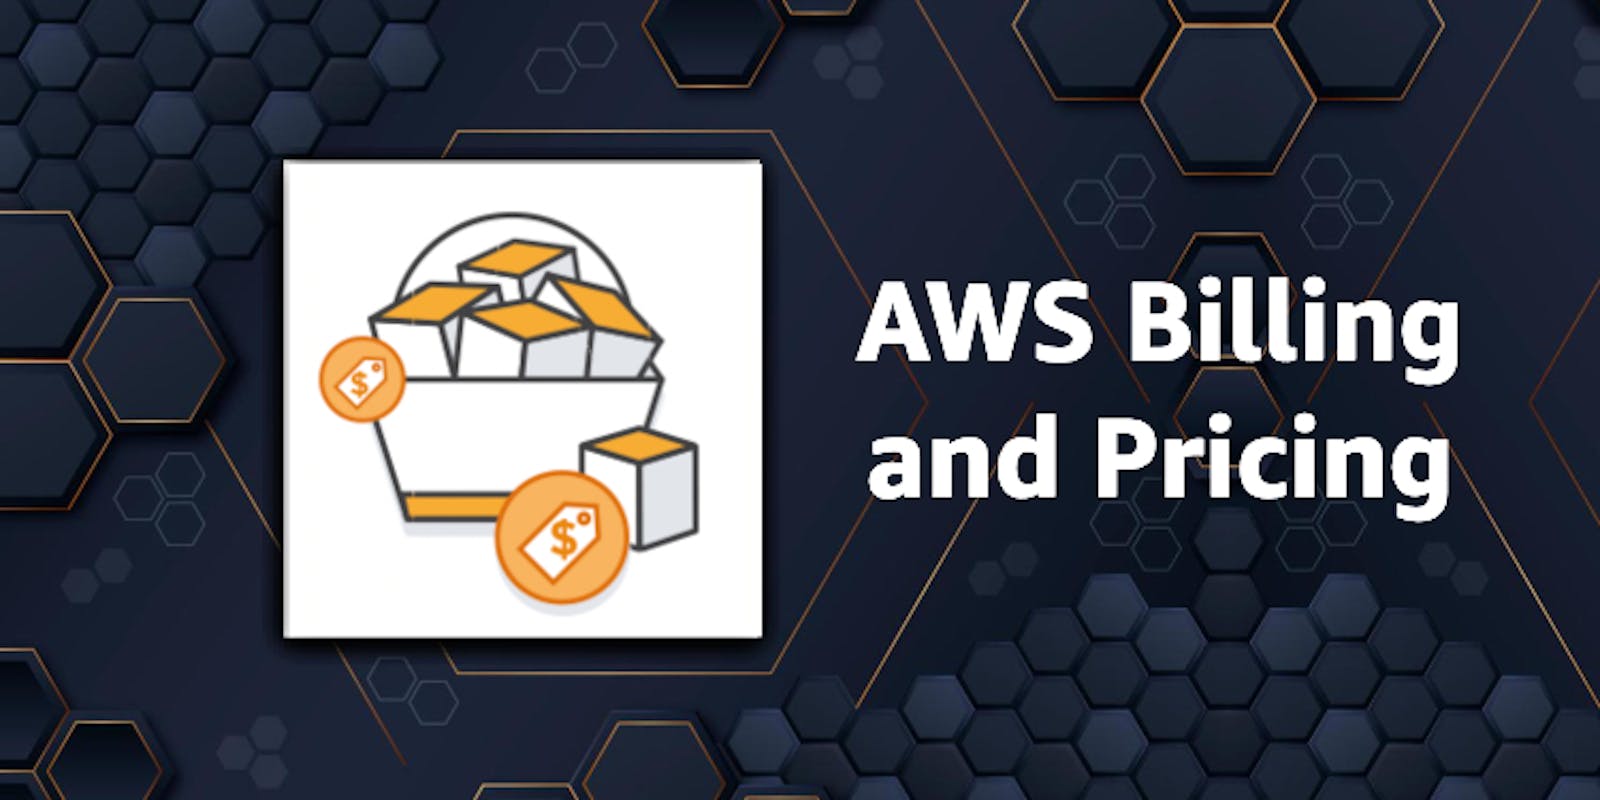 Simplifying AWS Billing: A Step-by-Step Guide to Implementing a Billing Calculator